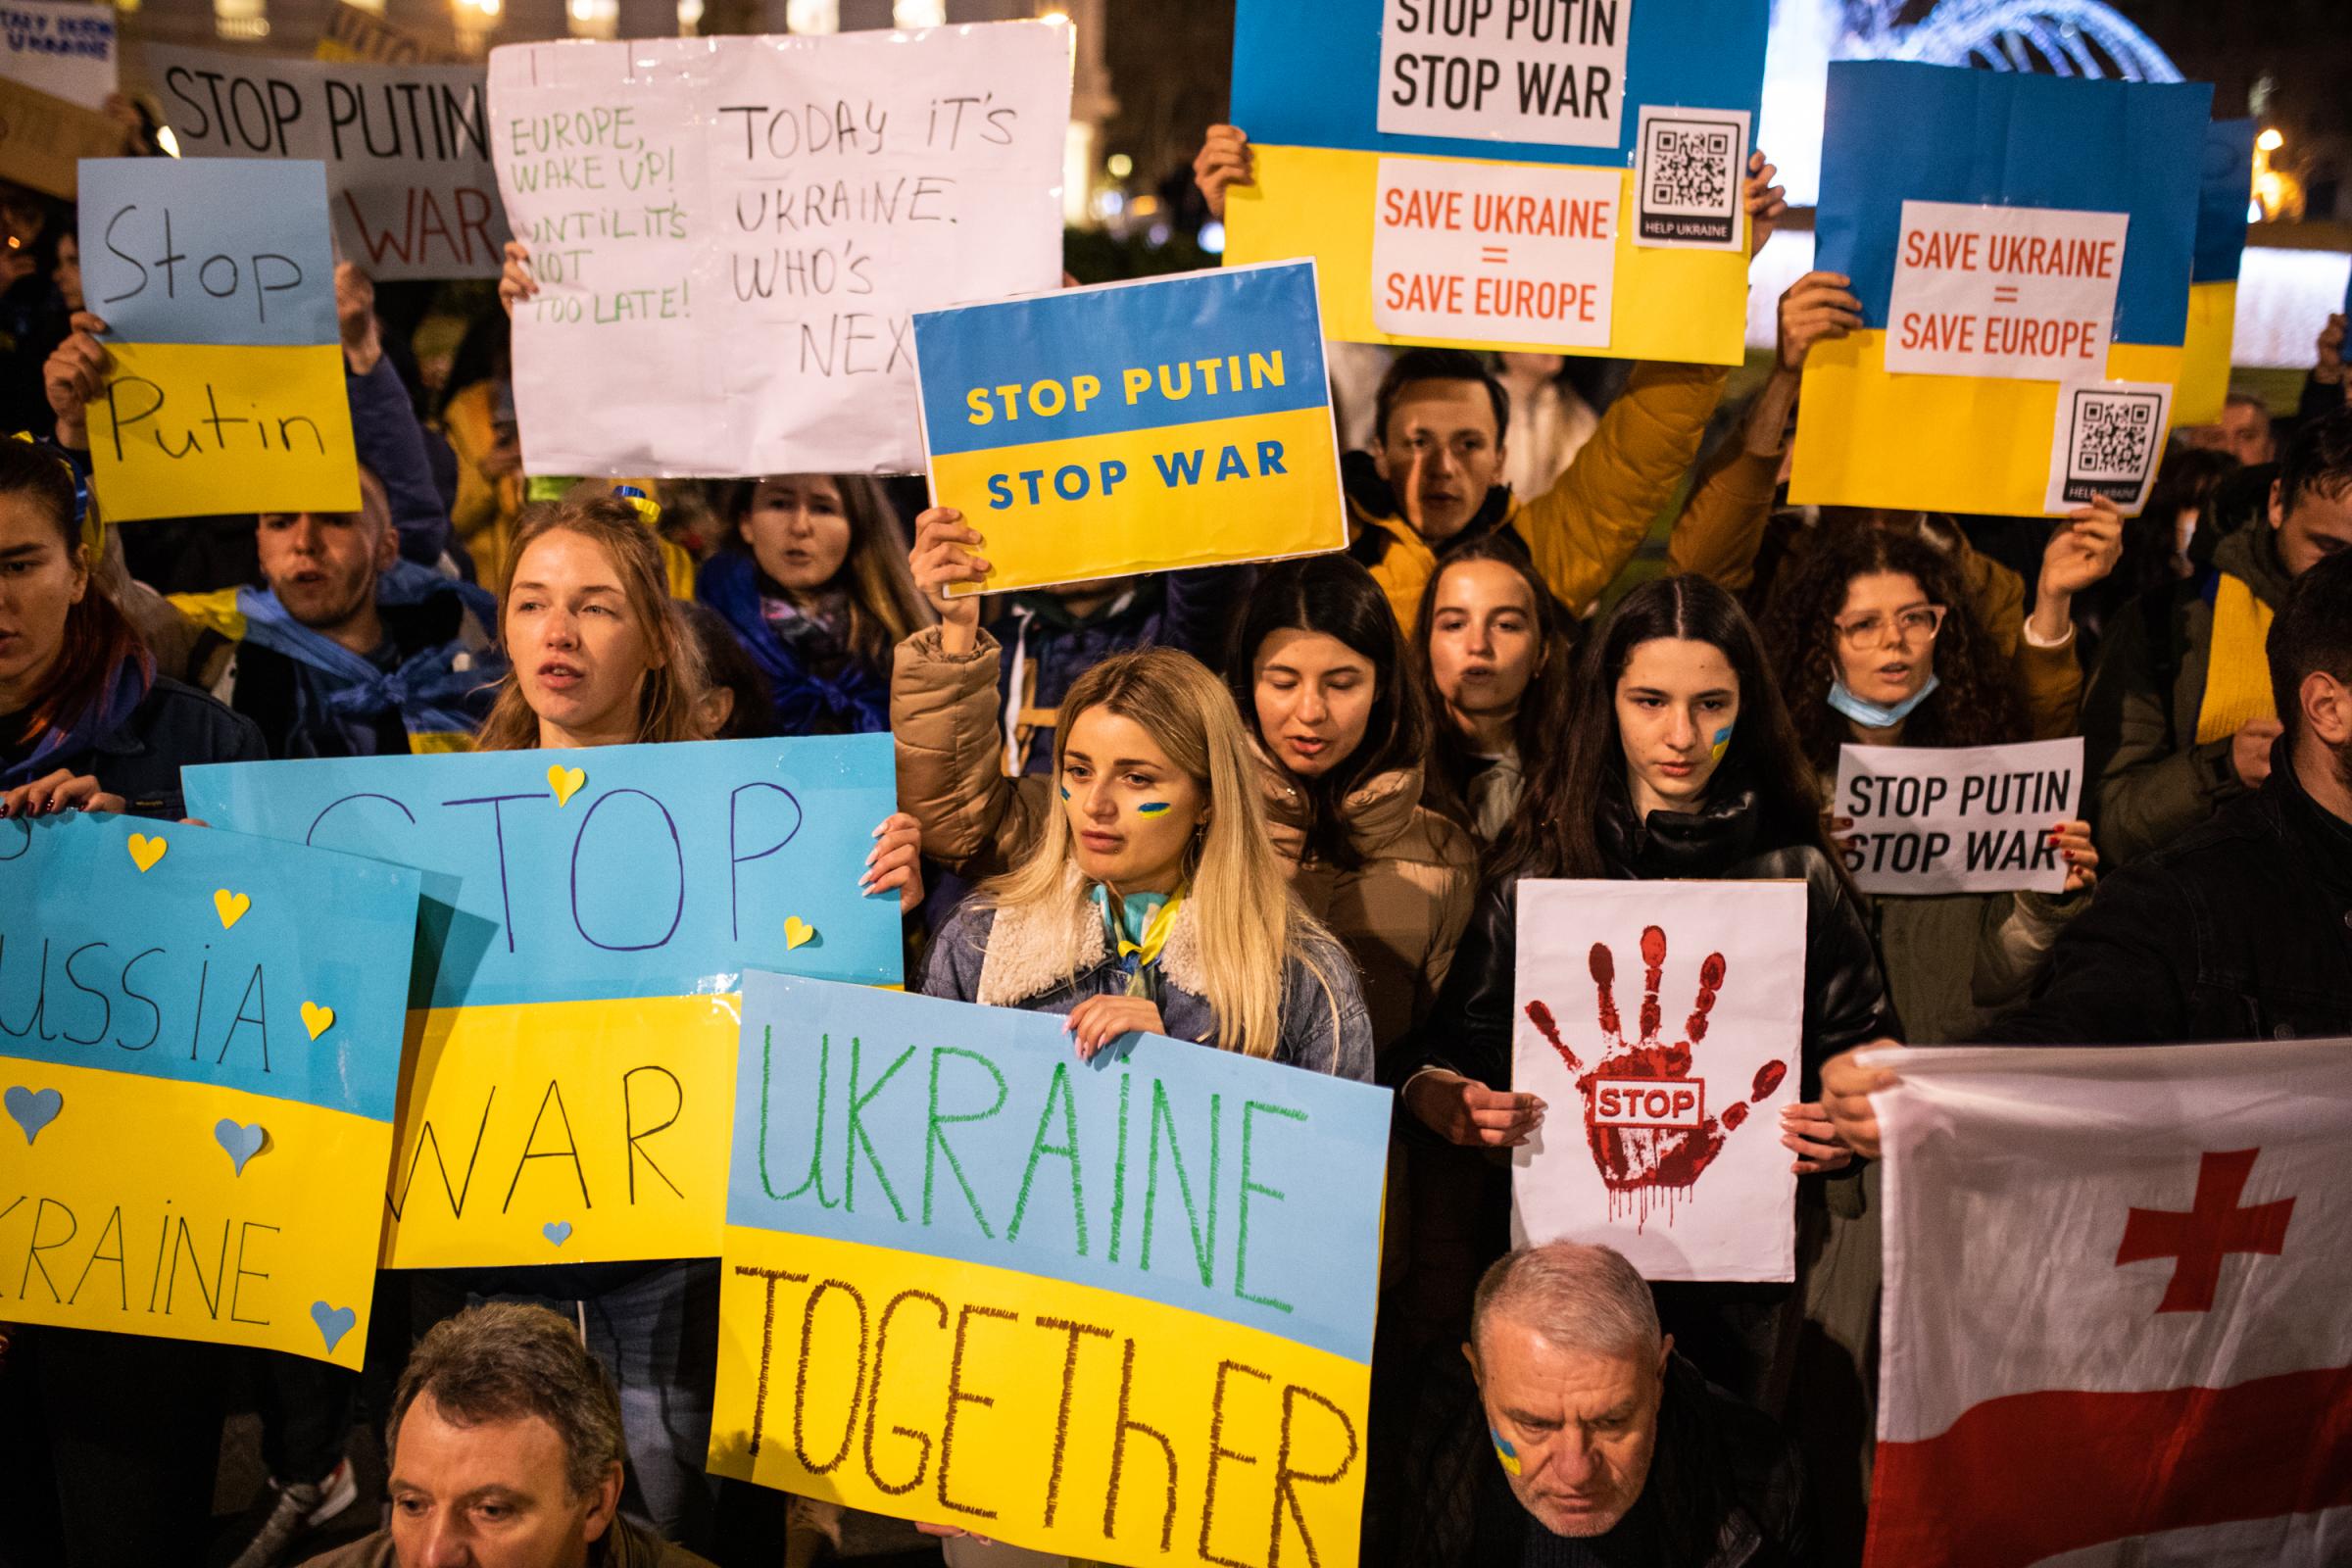 Protestors In Spain Rally For Ukraine After Russian Invasion - BARCELONA, SPAIN - FEBRUARY 25: People take part in a...